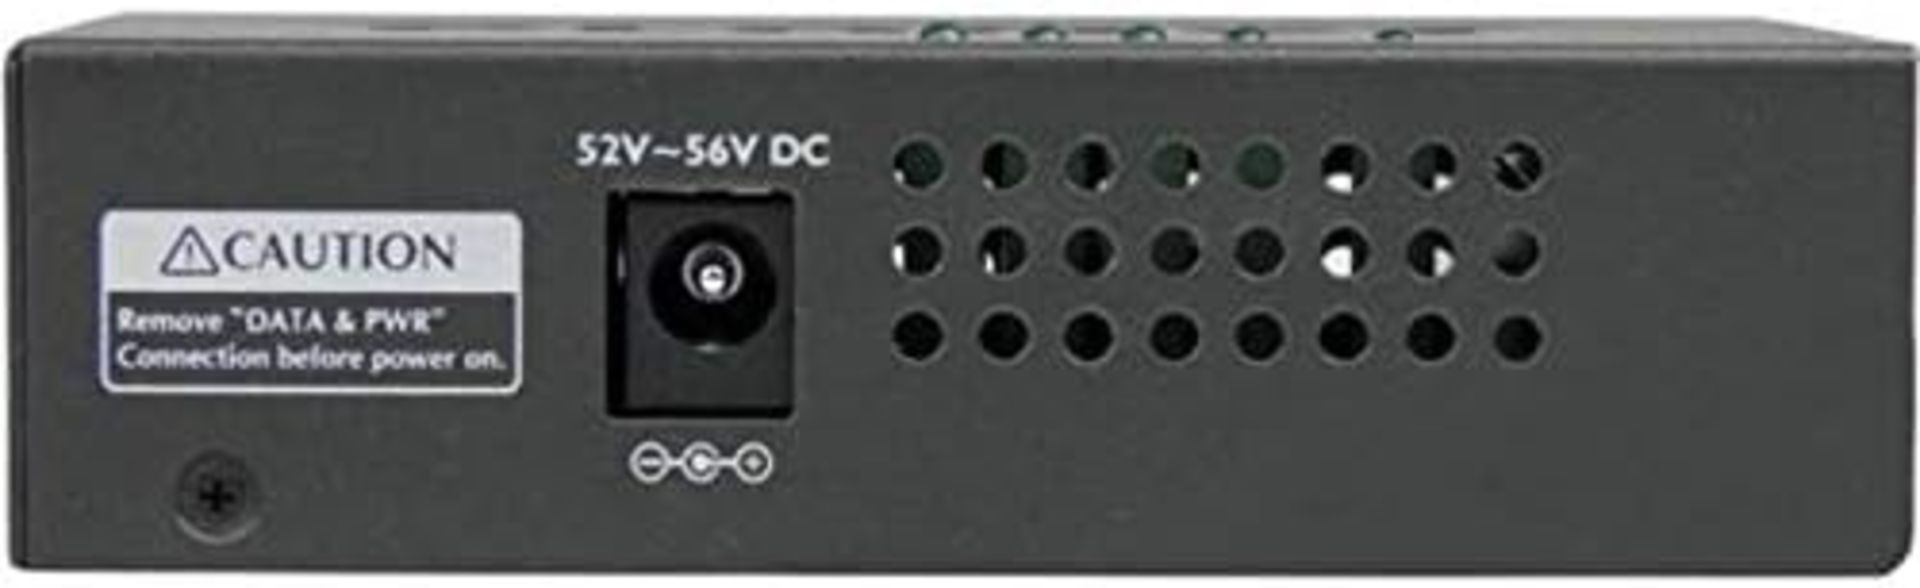 STARTECH 4 Port Gigabit Midspan - PoE+ Injector. RRP £208. More power, with less cost and hassle. - Image 4 of 5